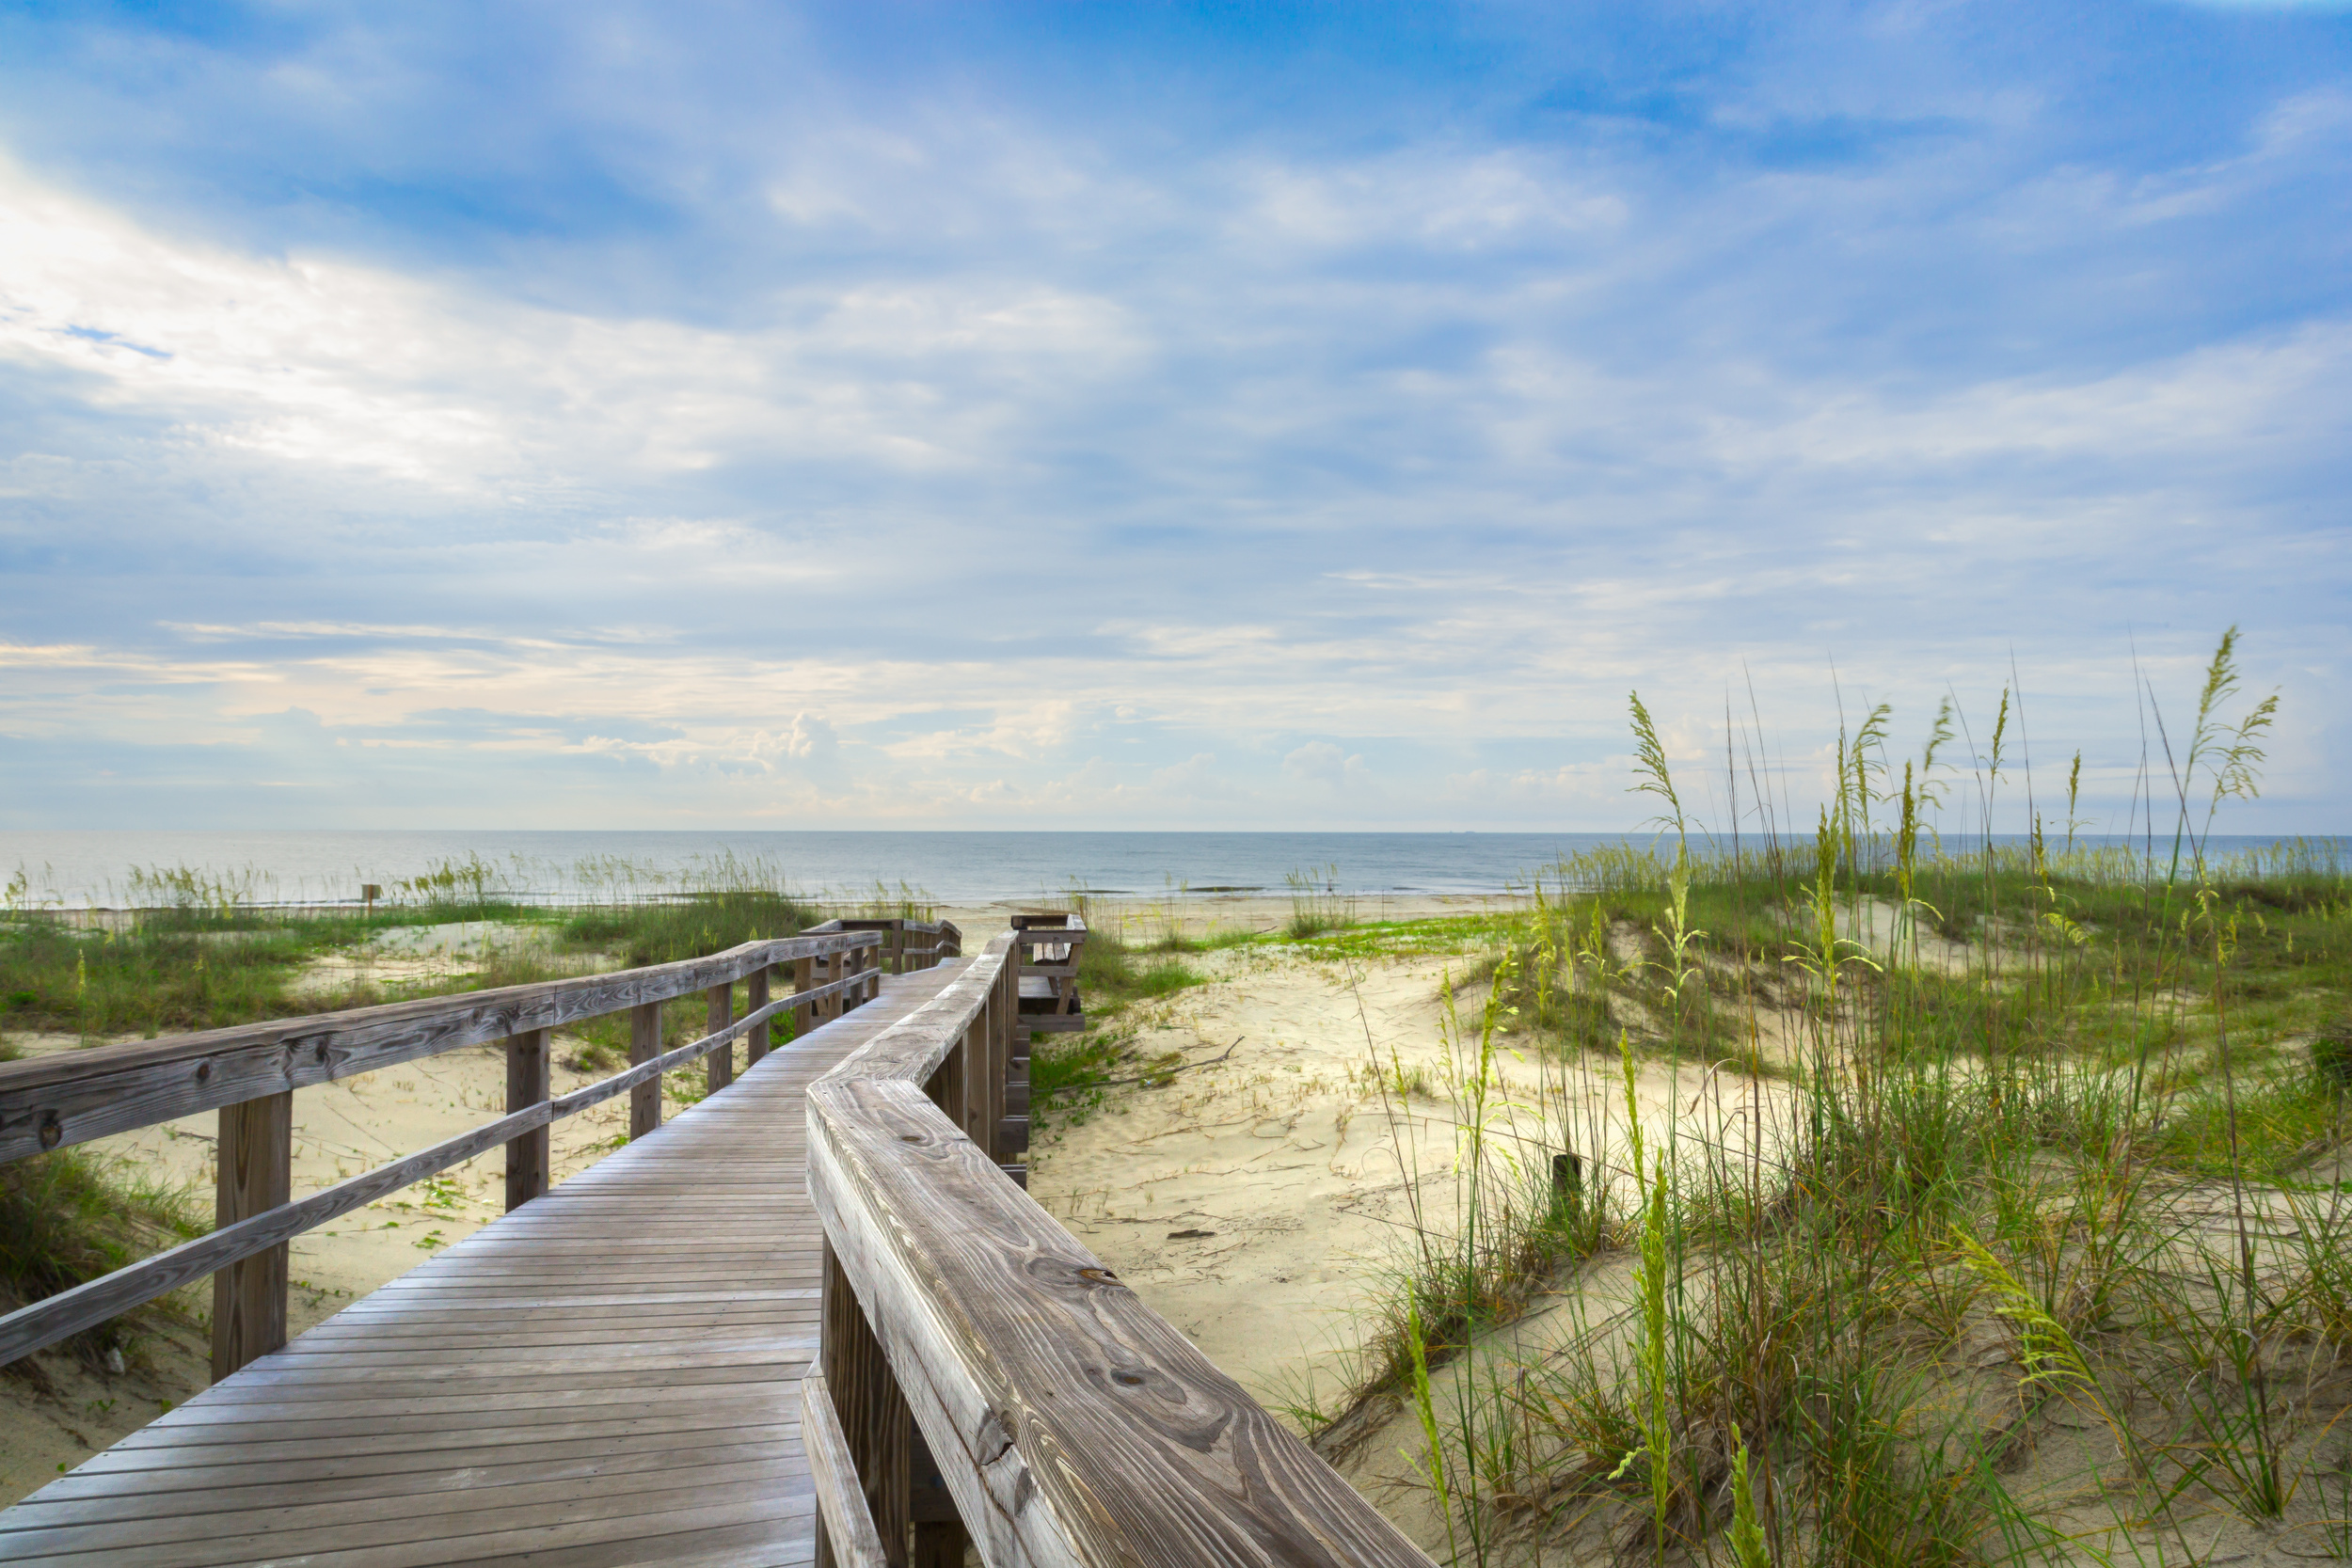 <p>The southern states are a wonderful option if you’re looking for some winter warmth that doesn’t require you to dig out your passport. In Georgia, winter is considerably milder than in the rest of the country, and Tybee Island feels like the beach vacation of your dreams, miles from the bustle of Atlanta.</p><p><a href='https://www.msn.com/en-us/community/channel/vid-cj9pqbr0vn9in2b6ddcd8sfgpfq6x6utp44fssrv6mc2gtybw0us'>Follow us on MSN to see more of our exclusive lifestyle content.</a></p>